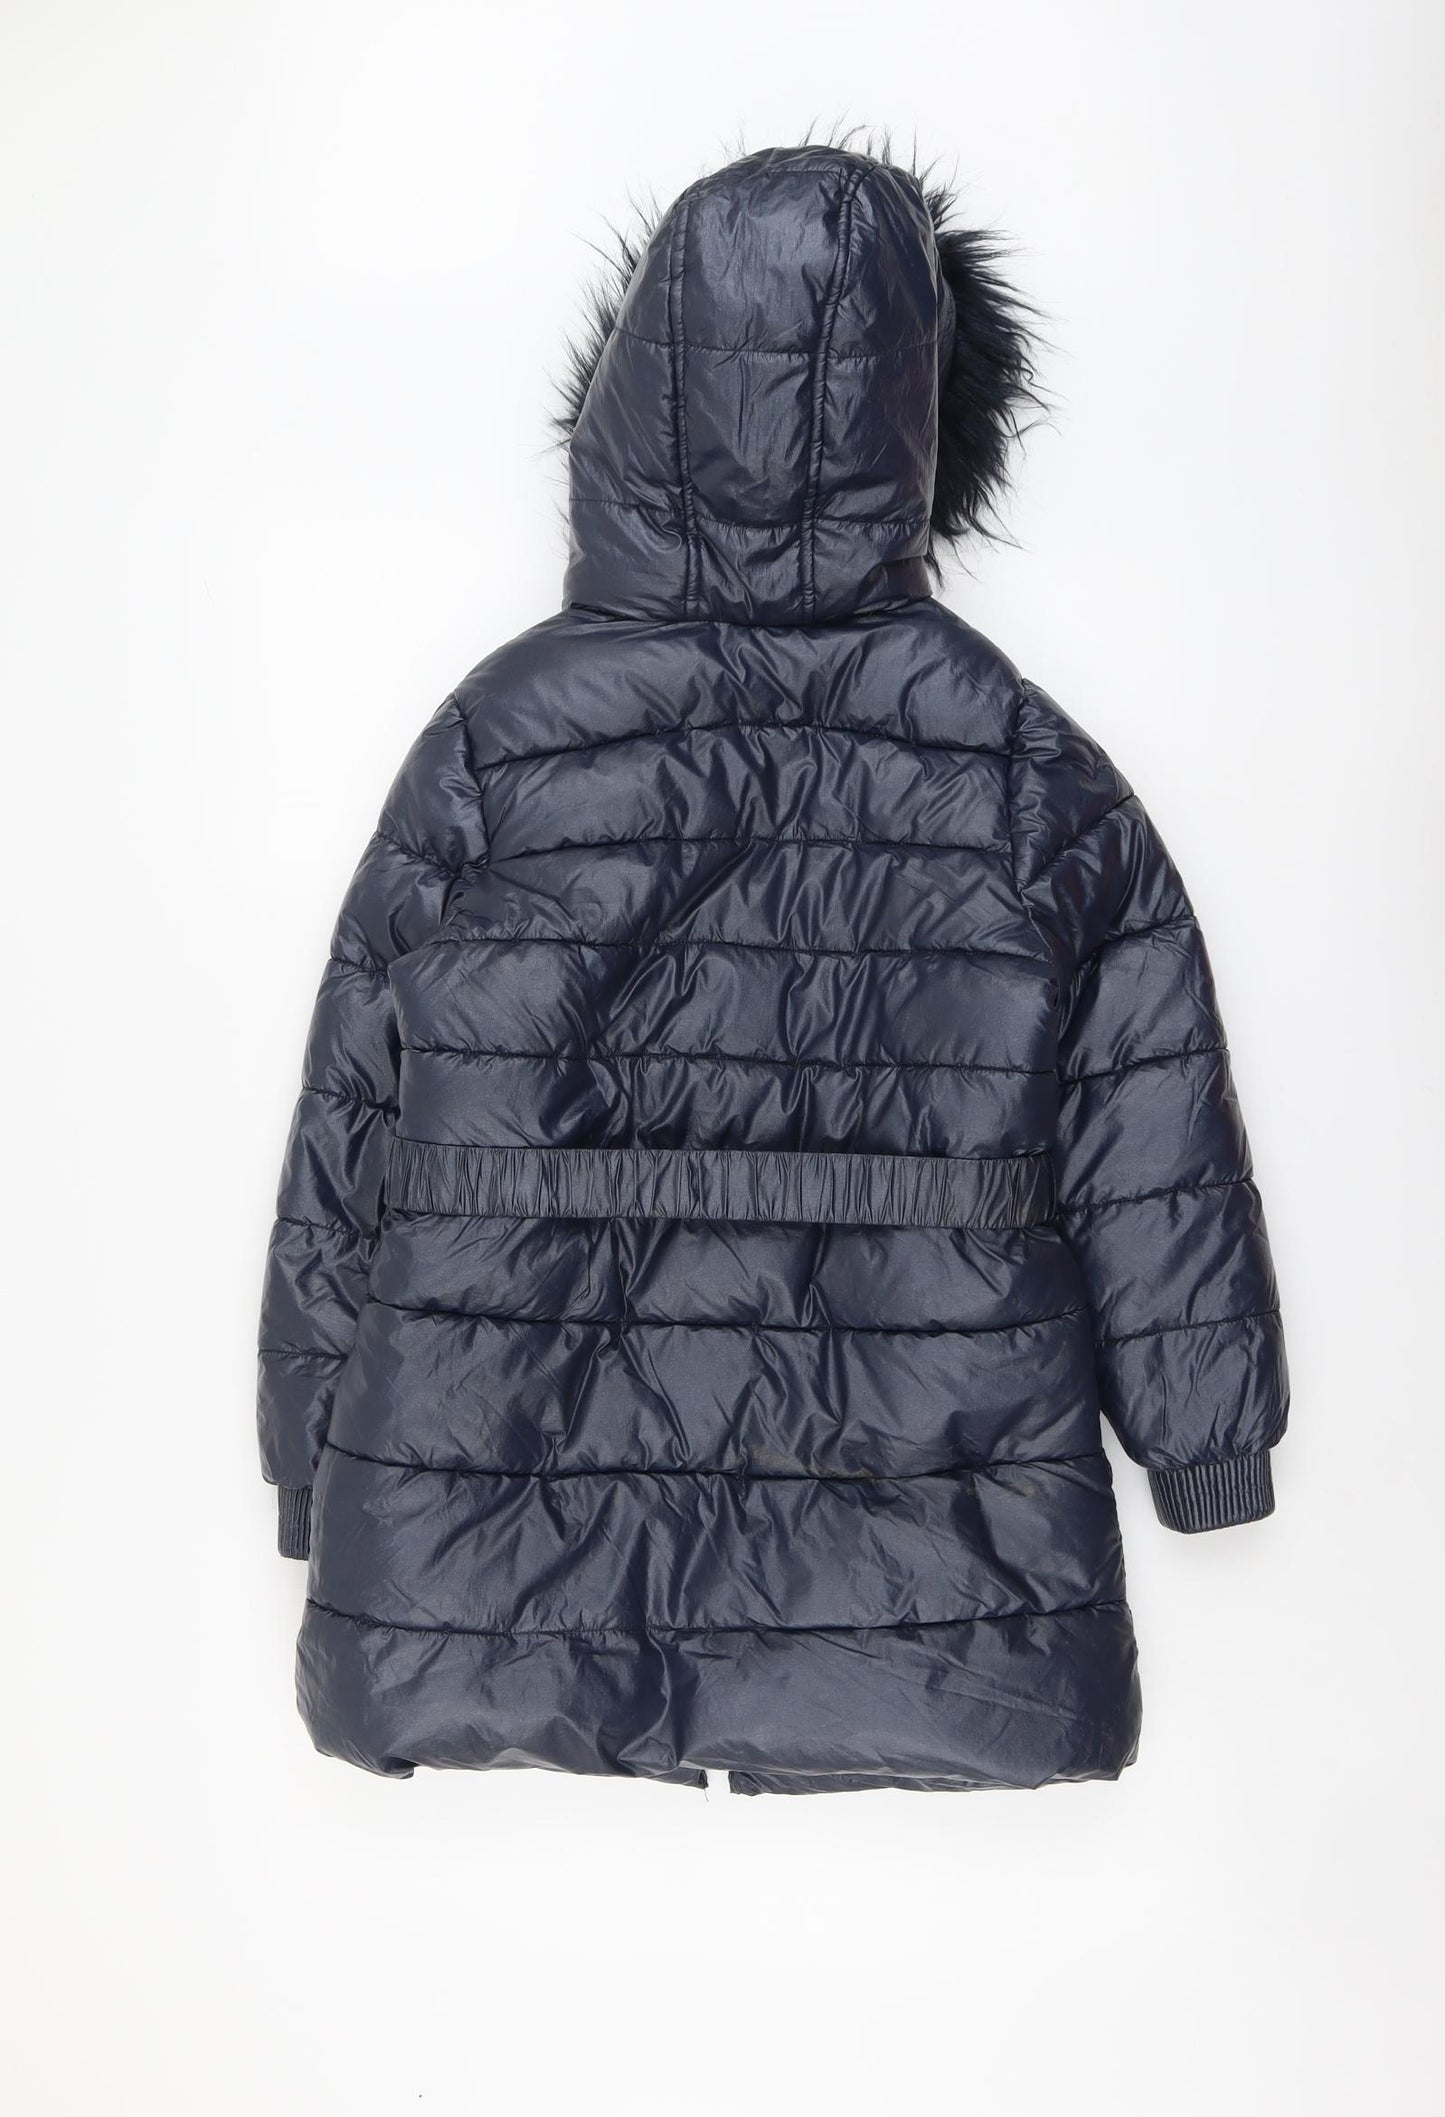 Marks and Spencer Girls Blue Quilted Coat Size 9-10 Years Zip